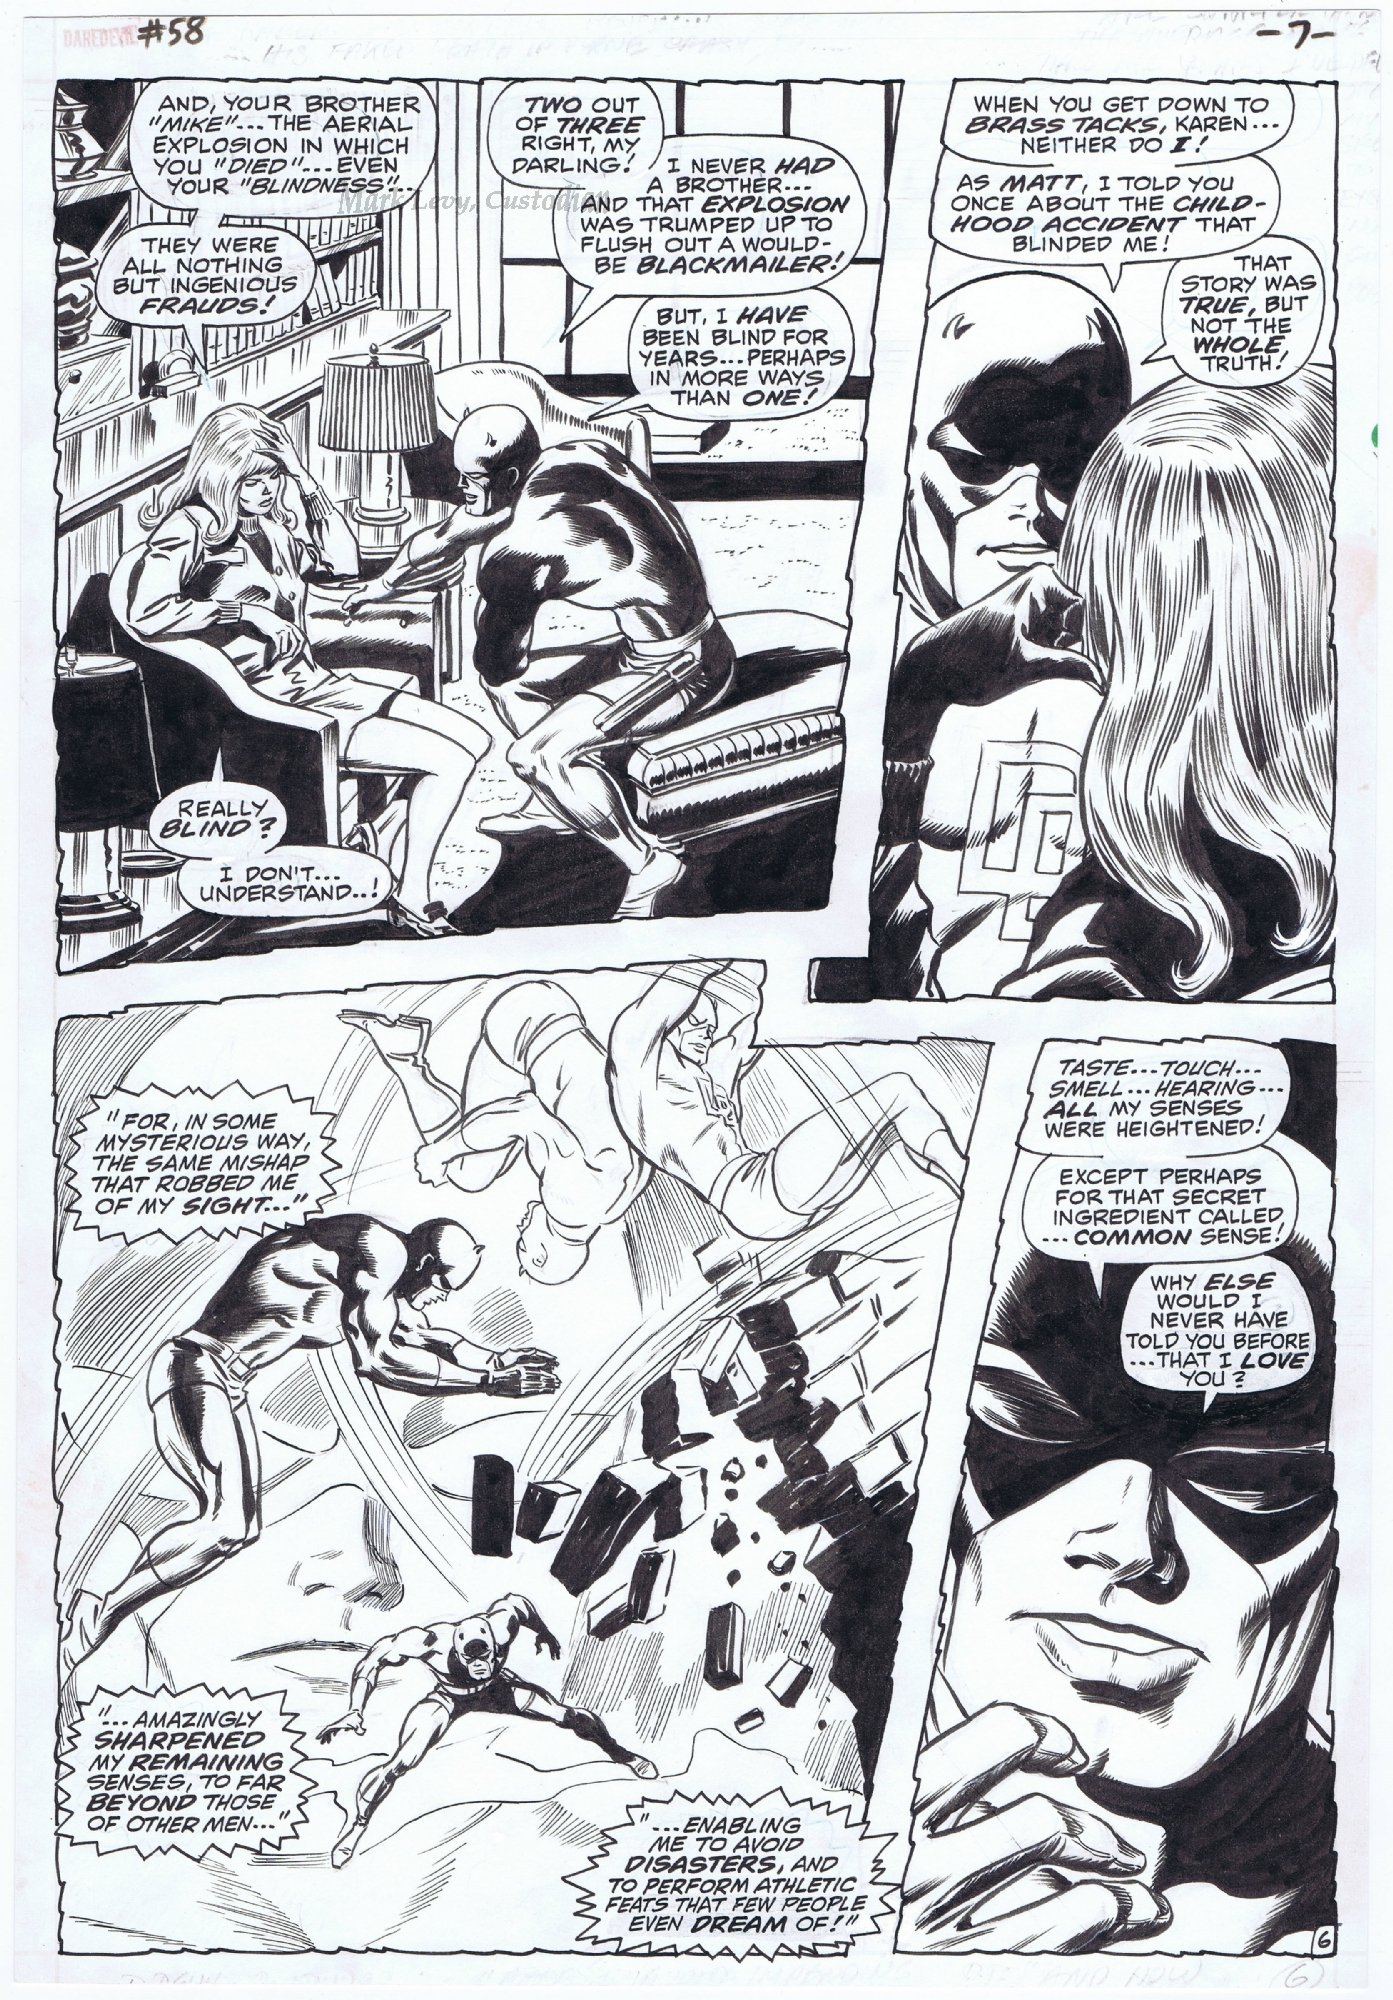 Colan  Shores - DD 58 - Daredevil ID to Karen Page, p 3 of 3, in Mark  Levy's 5. Character - Daredevil Comic Art Gallery Room